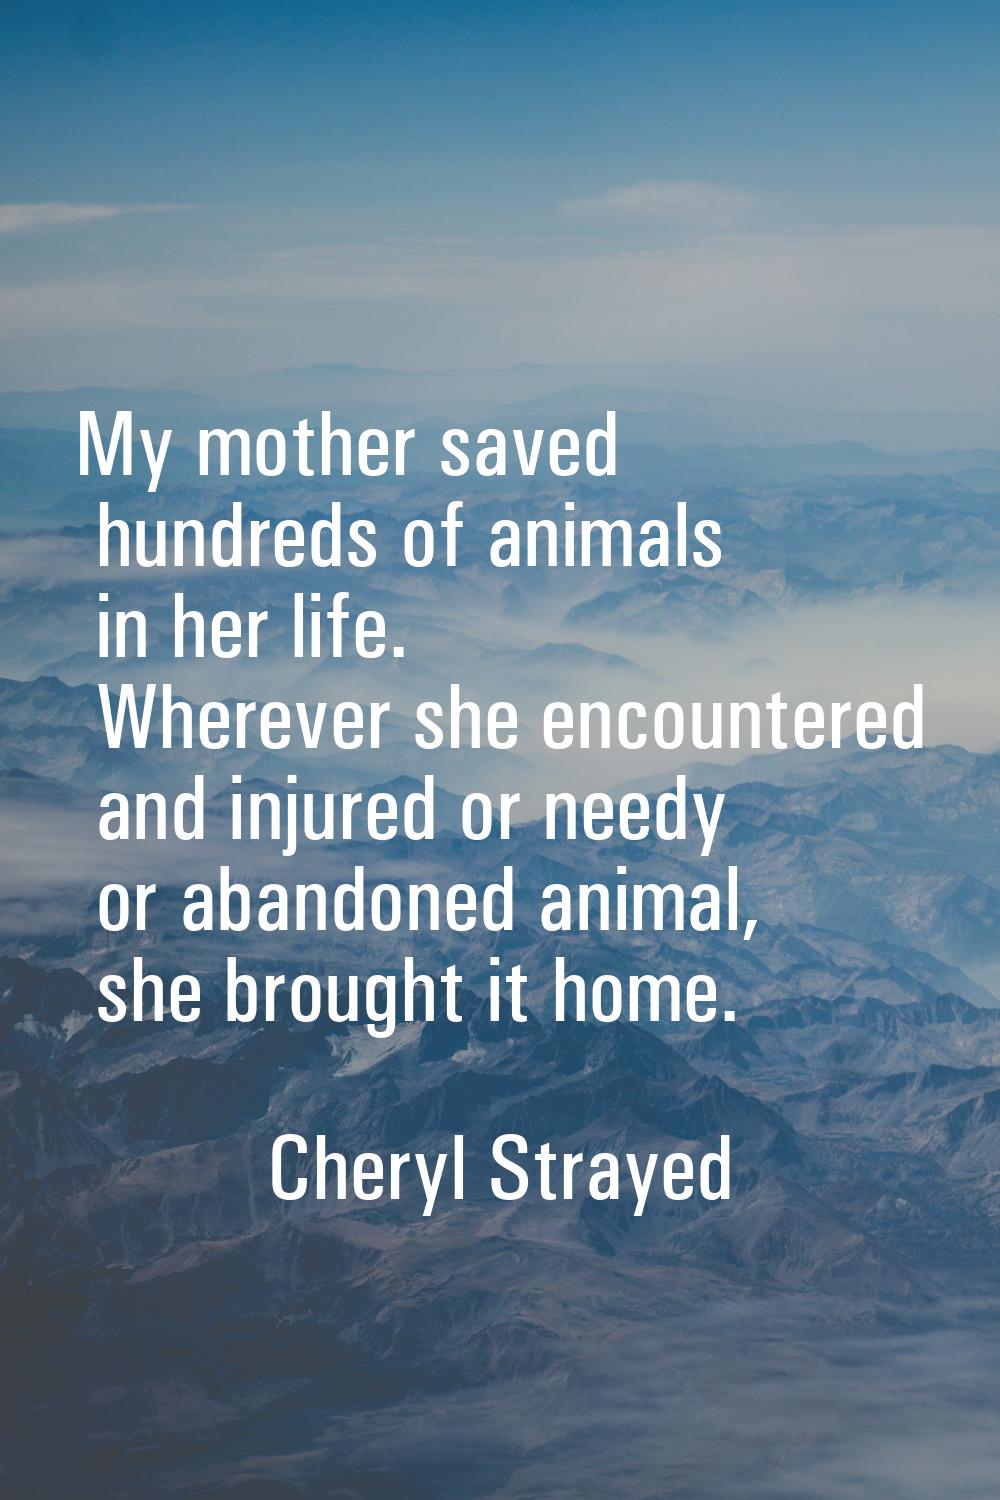 My mother saved hundreds of animals in her life. Wherever she encountered and injured or needy or a